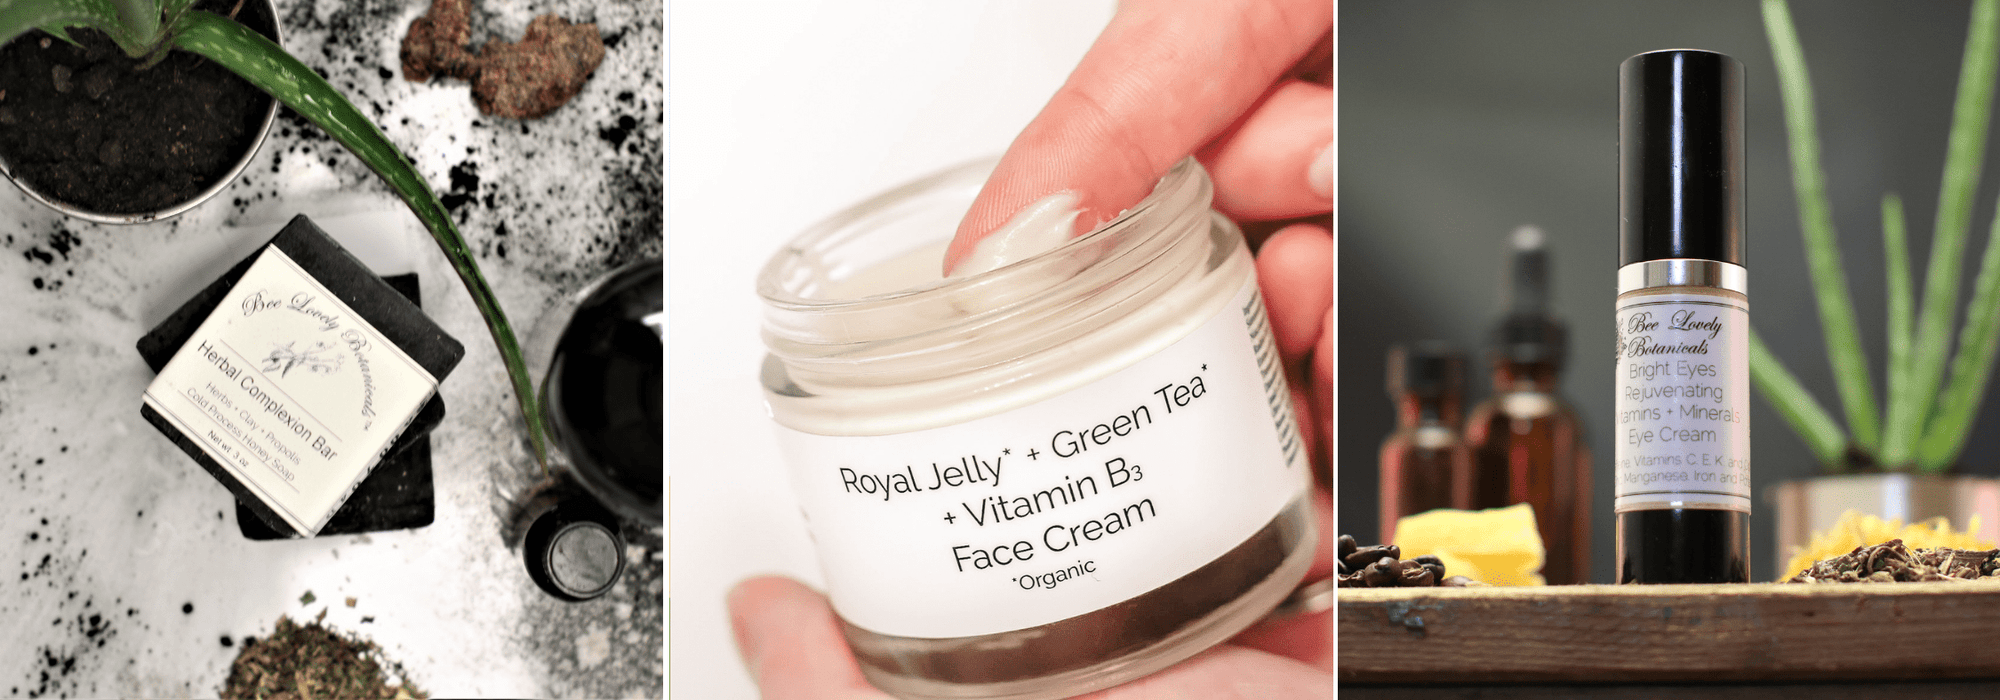 BeeLovelyBotanicals Complete Face Care Kit Royal Jelly Face Cream, Bright Eyes, and Complexion Bar